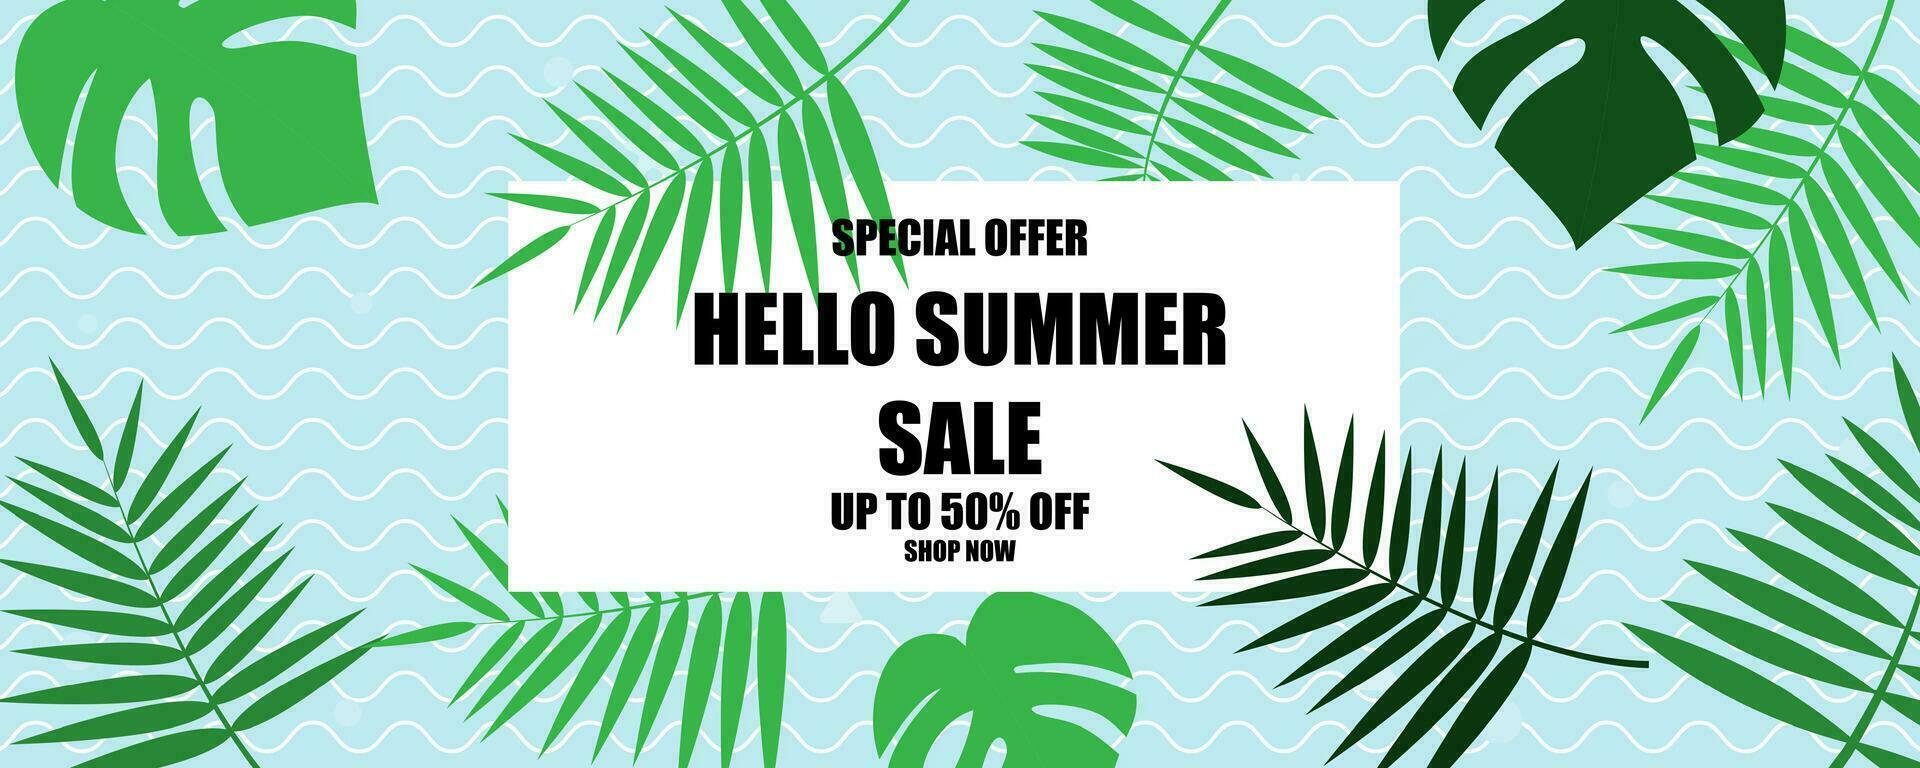 Summer sale banner in trendy bright colors with tropical leaves and discount text. Season promotion  Vector design